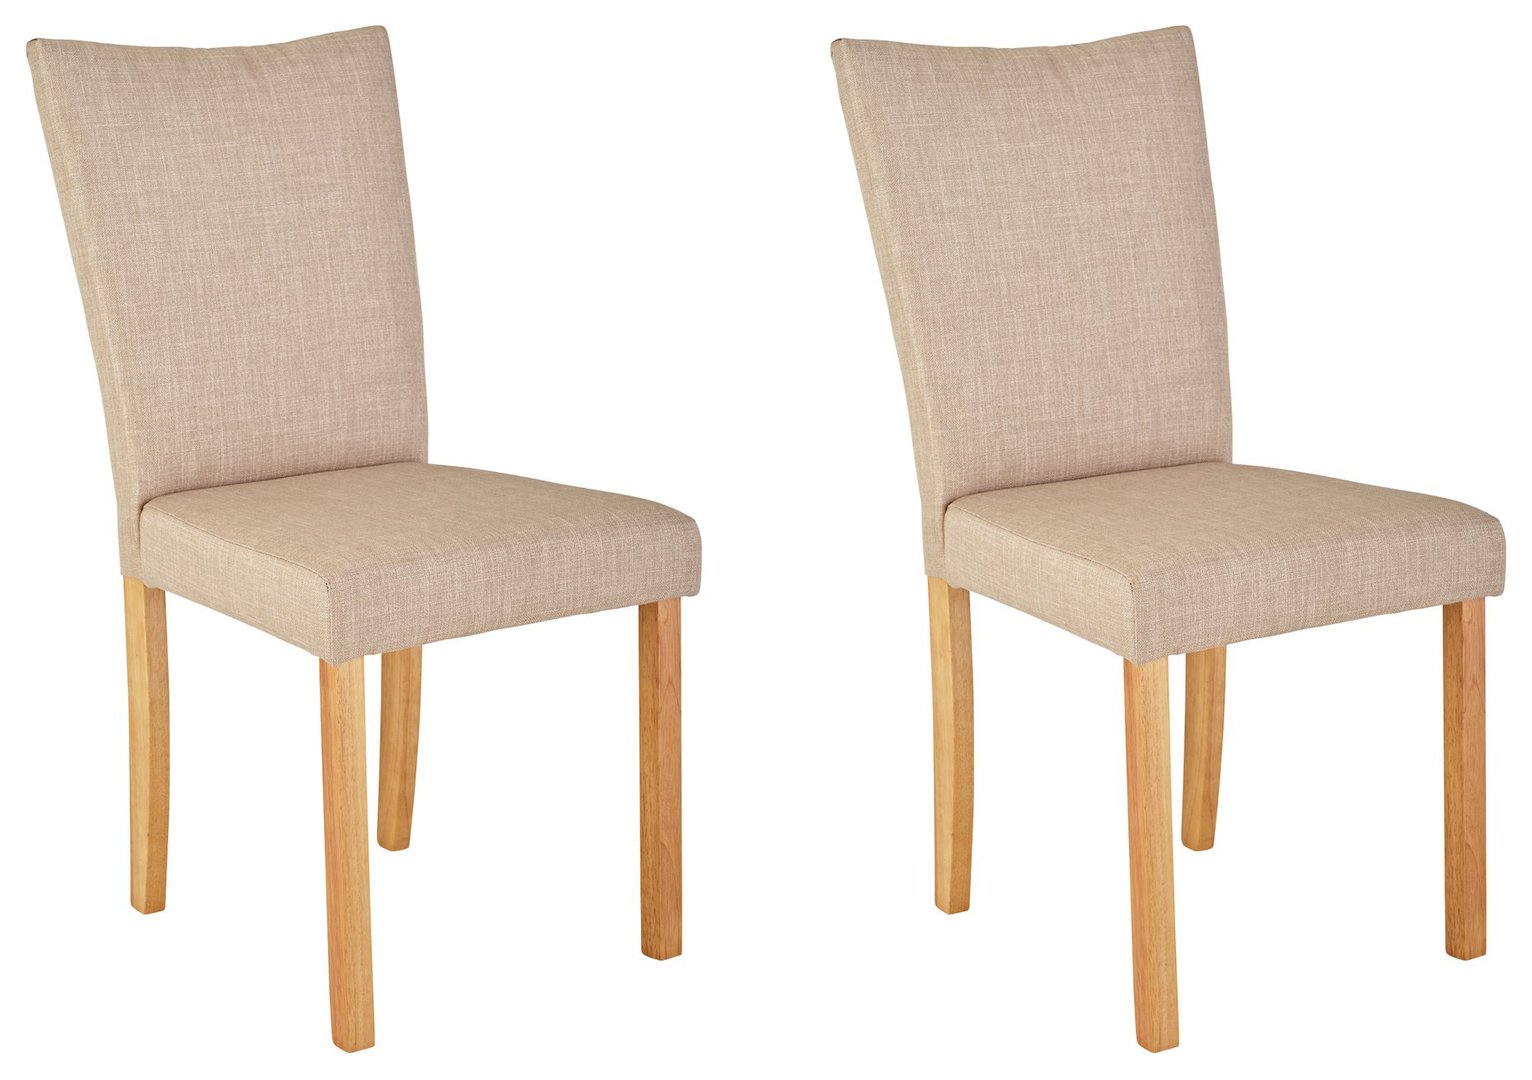 Argos Home Tabitha Pair of Wing Back Chairs - Natural